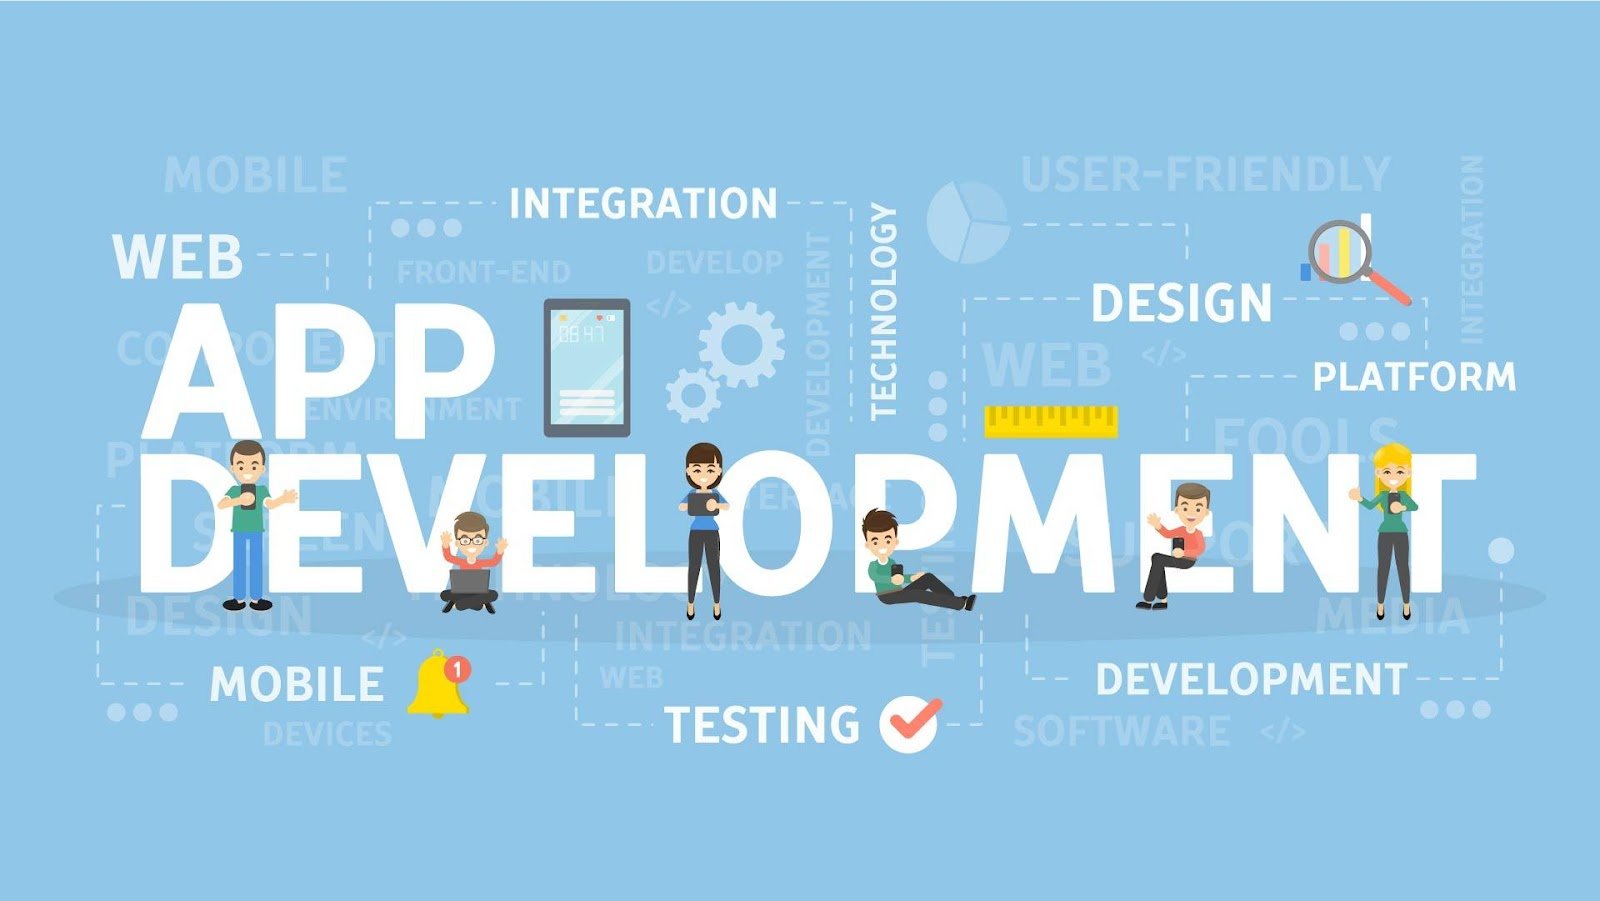 What the Mobile App Development Process Really Looks Like in Practice